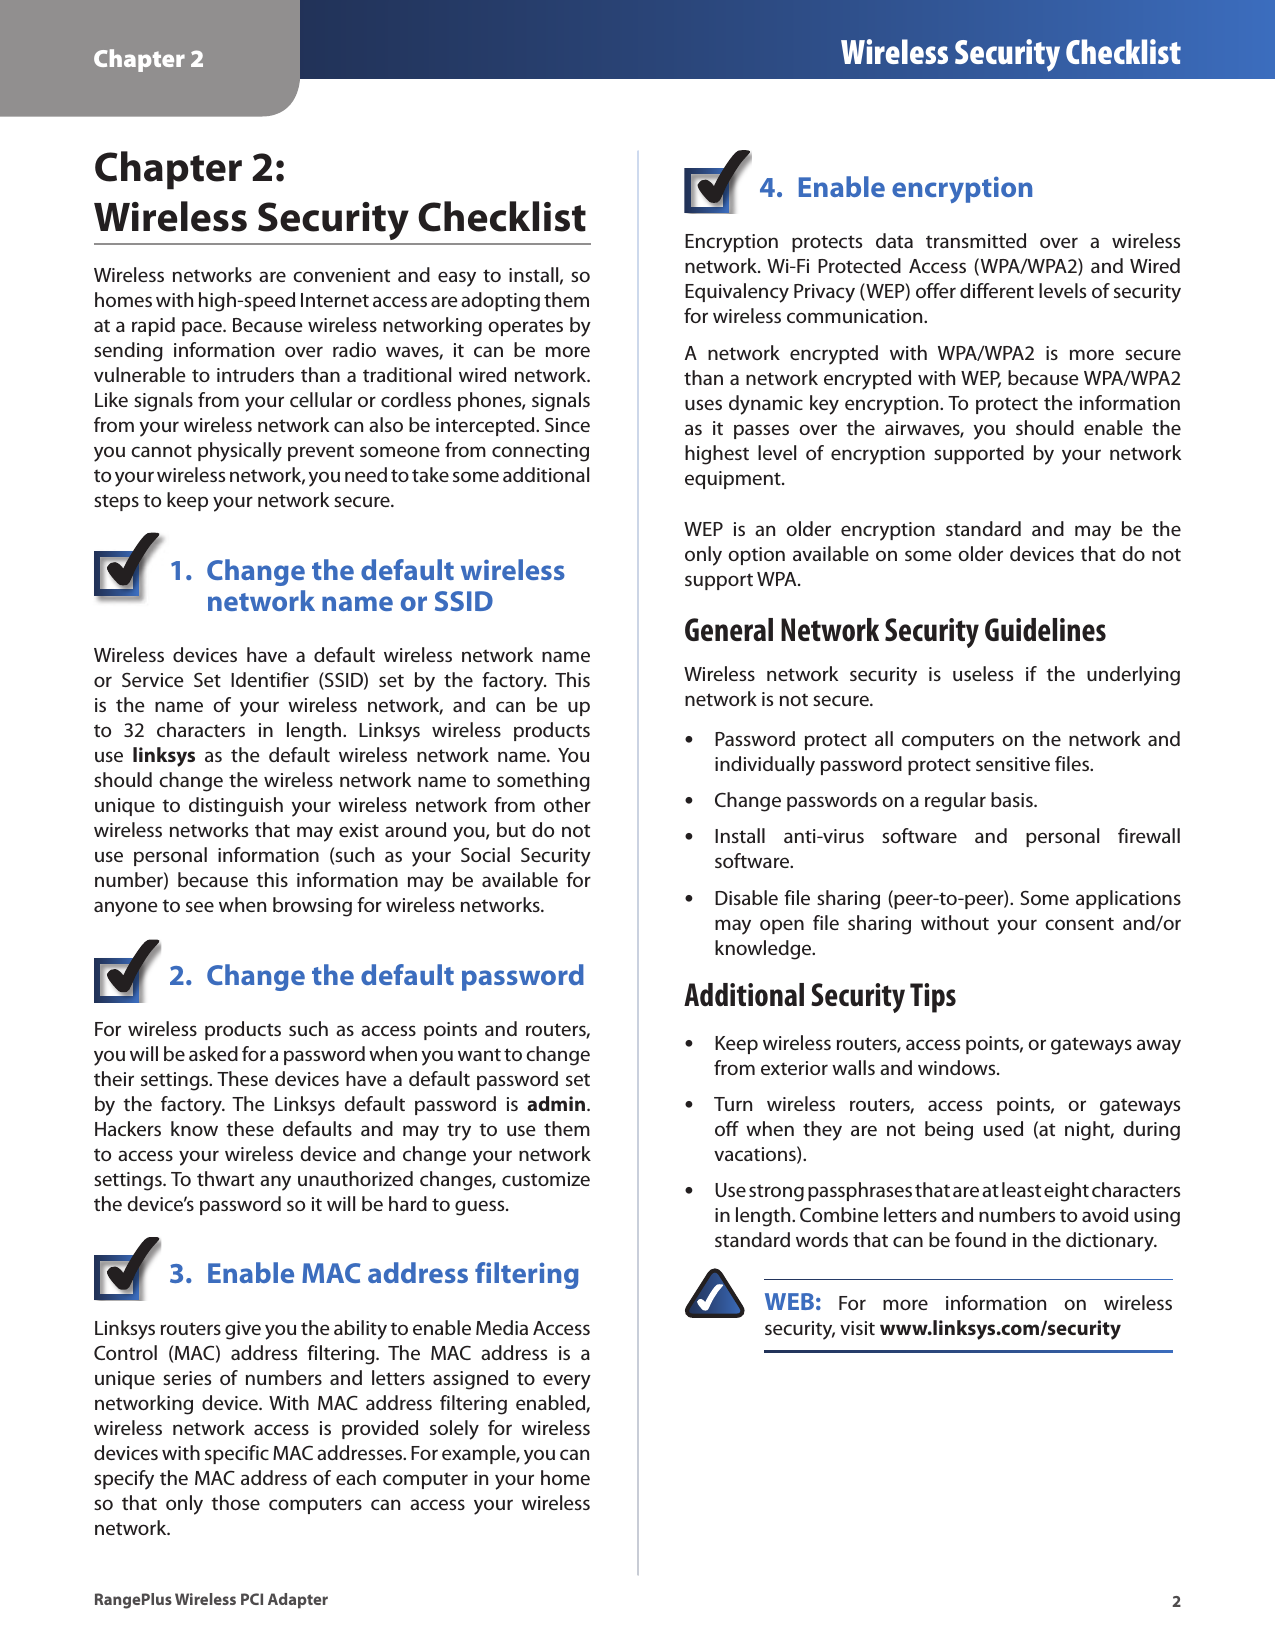 Chapter 2 Wireless Security Checklist2RangePlus Wireless PCI AdapterChapter 2:  Wireless Security ChecklistWireless  networks are convenient and  easy  to install, so homes with high-speed Internet access are adopting them at a rapid pace. Because wireless networking operates by sending  information  over  radio  waves,  it  can  be  more vulnerable to intruders than a traditional wired network. Like signals from your cellular or cordless phones, signals from your wireless network can also be intercepted. Since you cannot physically prevent someone from connecting to your wireless network, you need to take some additional steps to keep your network secure. 1.  Change the default wireless    network name or SSIDWireless  devices  have  a  default  wireless  network  name or  Service  Set  Identifier  (SSID)  set  by  the  factory.  This is  the  name  of  your  wireless  network,  and  can  be  up to  32  characters  in  length.  Linksys  wireless  products use  linksys  as  the  default  wireless  network  name.  You should change the wireless network name to something unique  to distinguish  your wireless  network from  other wireless networks that may exist around you, but do not use  personal  information  (such  as  your  Social  Security number)  because  this  information  may  be  available  for anyone to see when browsing for wireless networks. 2.  Change the default passwordFor wireless products such as access points and routers, you will be asked for a password when you want to change their settings. These devices have a default password set by  the  factory.  The  Linksys  default  password  is  admin. Hackers  know  these  defaults  and  may  try  to  use  them to access your wireless device and change your network settings. To thwart any unauthorized changes, customize the device’s password so it will be hard to guess.3.  Enable MAC address filteringLinksys routers give you the ability to enable Media Access Control  (MAC)  address  filtering.  The  MAC  address  is  a unique  series  of  numbers  and  letters  assigned  to every networking  device. With  MAC  address filtering  enabled, wireless  network  access  is  provided  solely  for  wireless devices with specific MAC addresses. For example, you can specify the MAC address of each computer in your home so  that  only  those  computers  can  access  your  wireless network. 4.  Enable encryptionEncryption  protects  data  transmitted  over  a  wireless network. Wi-Fi Protected  Access (WPA/WPA2) and Wired Equivalency Privacy (WEP) offer different levels of security for wireless communication.A  network  encrypted  with  WPA/WPA2  is  more  secure than a network encrypted with WEP, because WPA/WPA2 uses dynamic key encryption. To protect the information as  it  passes  over  the  airwaves,  you  should  enable  the highest  level  of  encryption  supported  by  your  network equipment. WEP  is  an  older  encryption  standard  and  may  be  the only option available on some older devices that do not support WPA.General Network Security GuidelinesWireless  network  security  is  useless  if  the  underlying network is not secure. Password protect  all computers on  the network  and individually password protect sensitive files.Change passwords on a regular basis.Install  anti-virus  software  and  personal  firewall software.Disable file sharing (peer-to-peer). Some applications may  open  file  sharing  without  your  consent  and/or knowledge.Additional Security TipsKeep wireless routers, access points, or gateways away from exterior walls and windows.Turn  wireless  routers,  access  points,  or  gateways off  when  they  are  not  being  used  (at  night,  during vacations).Use strong passphrases that are at least eight characters in length. Combine letters and numbers to avoid using standard words that can be found in the dictionary. WEB:  For  more  information  on  wireless security, visit www.linksys.com/security•••••••